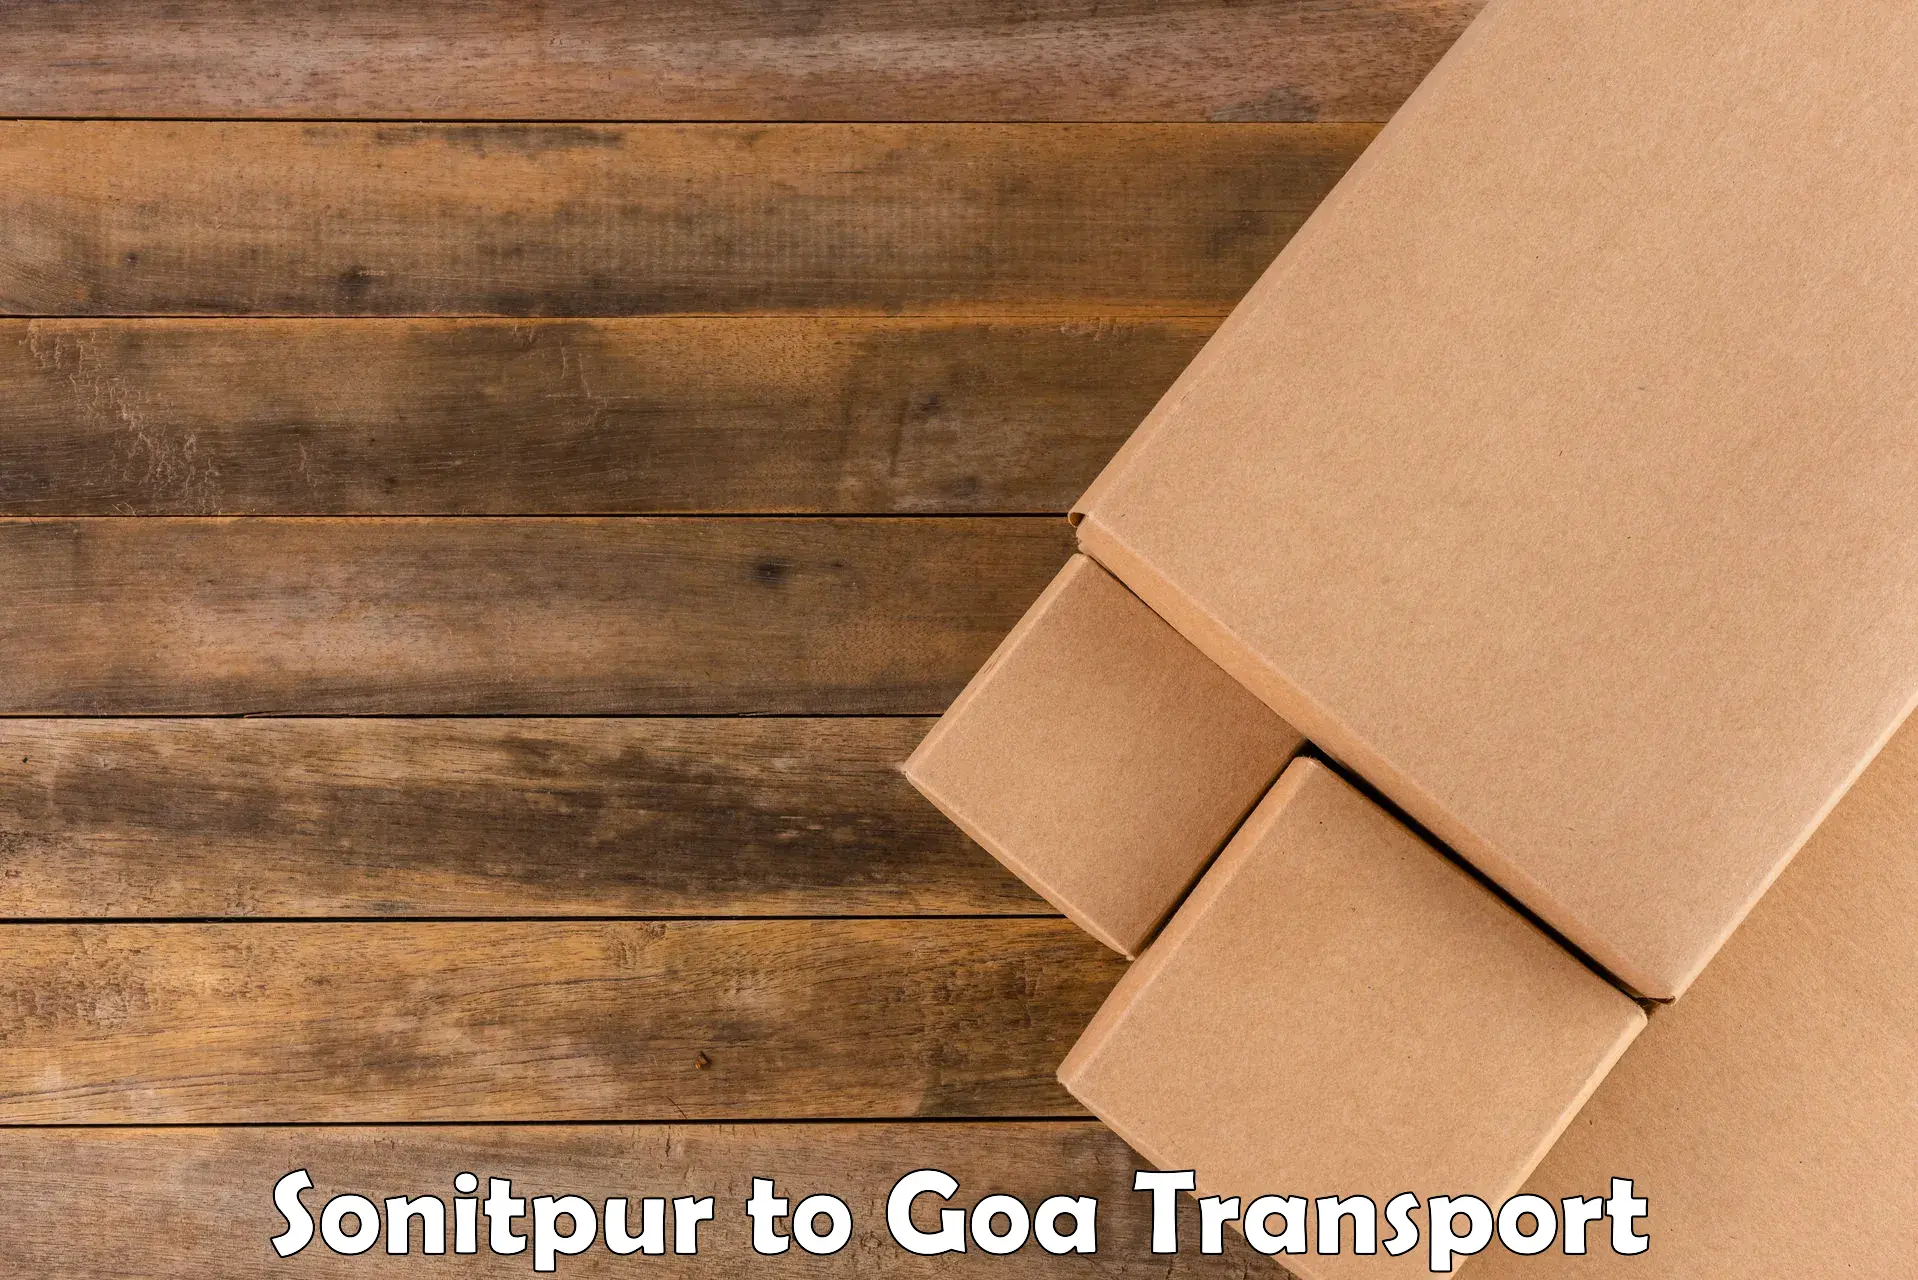 Pick up transport service Sonitpur to South Goa